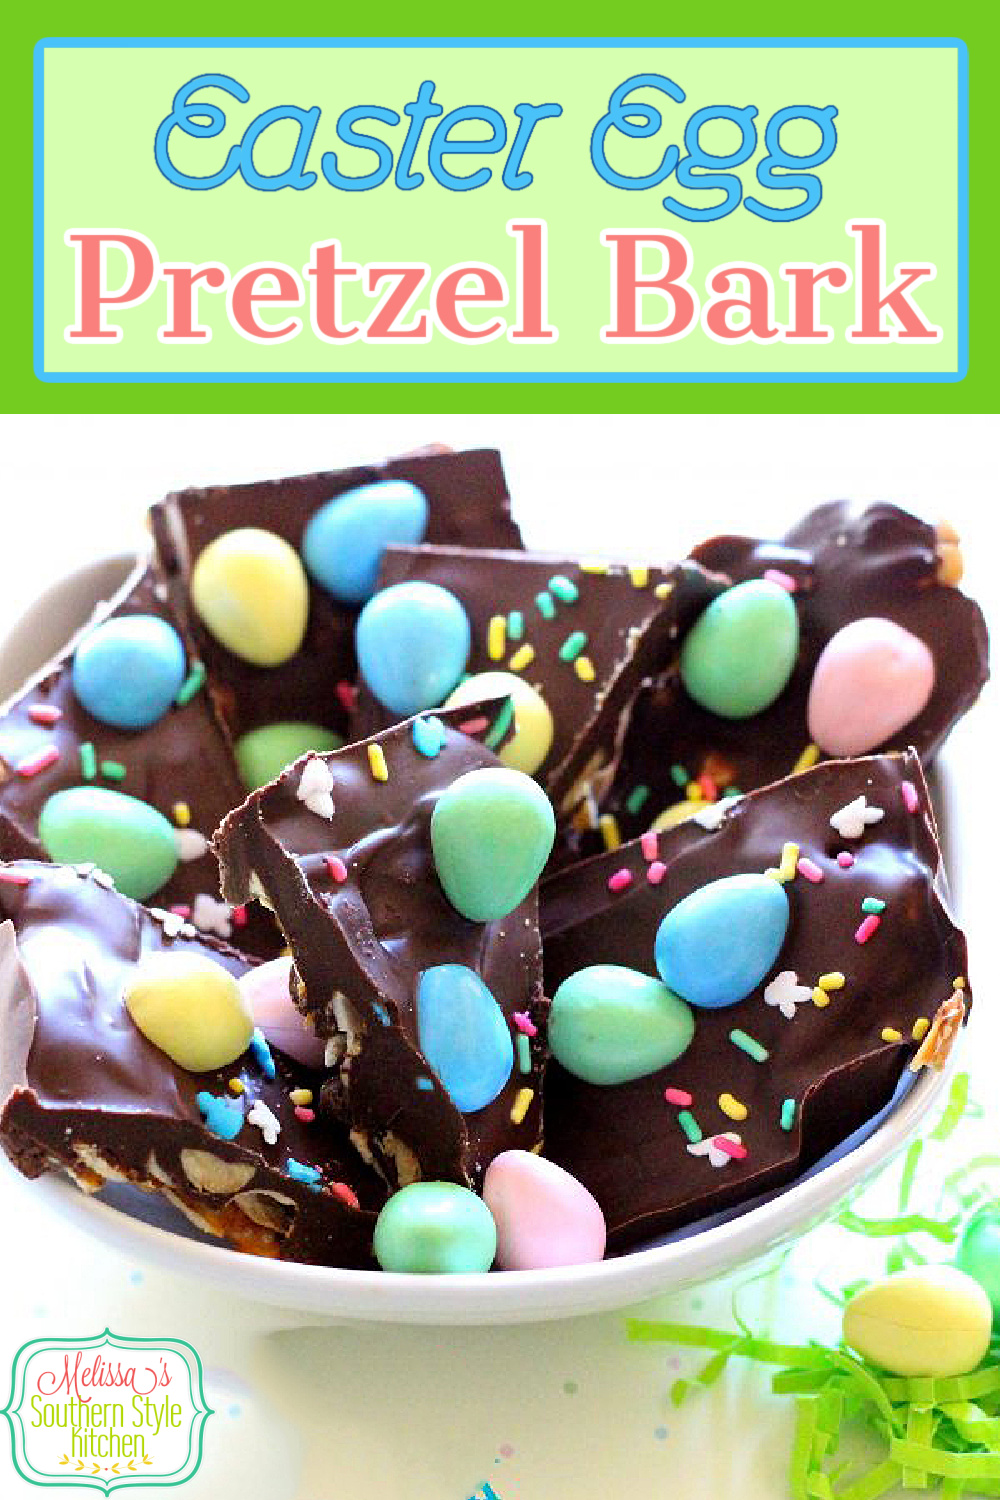 Add this easy Easter Egg Pretzel Bark to your Easter baskets for a handmade treat #eastereggpretzelbark #candybark #chocolatebark #eastereggs #chocolatebark #candy #candybarrecipes #southernrecipes #easterdesserts